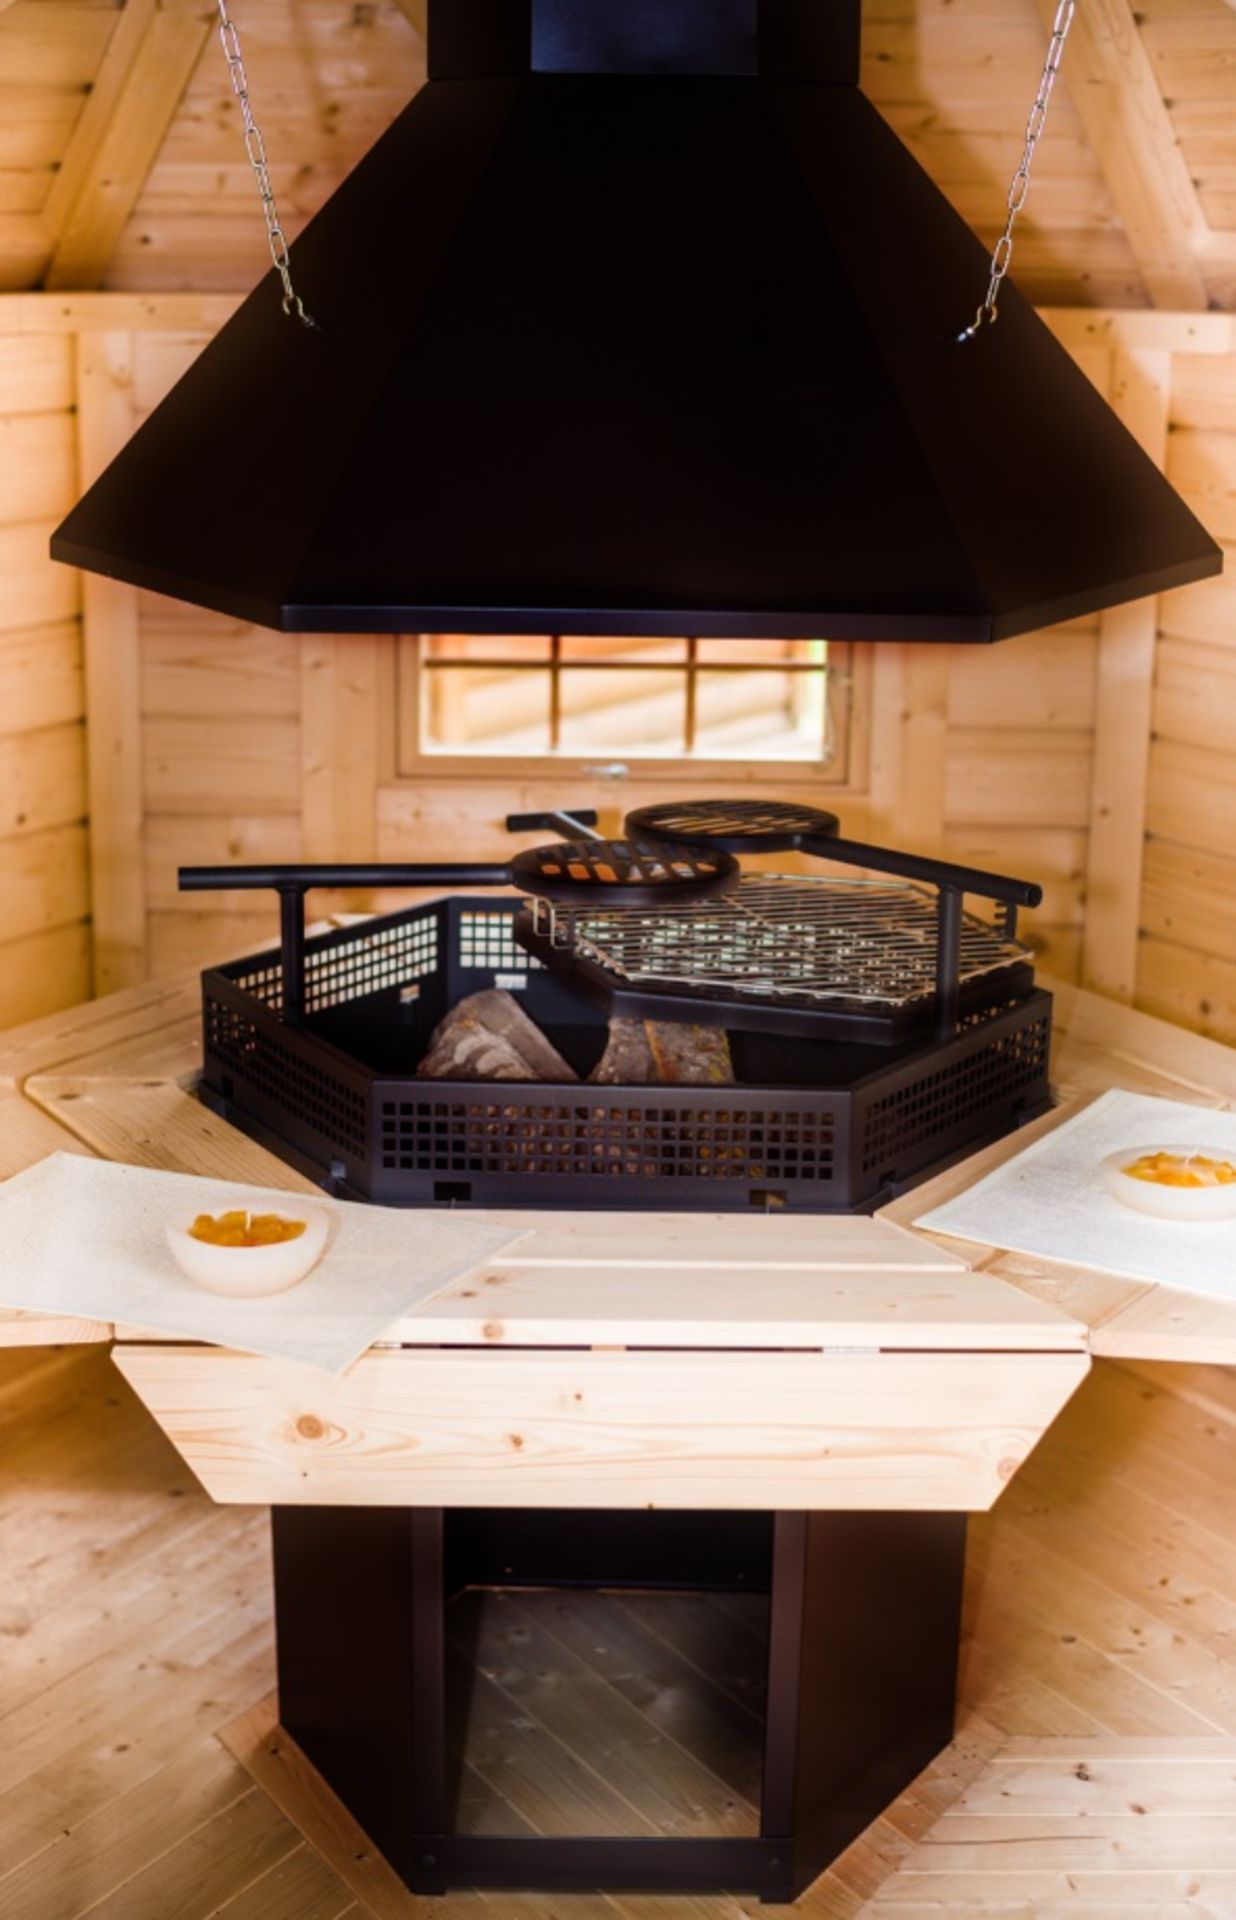 V Brand New 4.5m sq Grill Cabin - Inside Grill With Cooking Platforms & Table - Bitumen Roof - Image 2 of 6